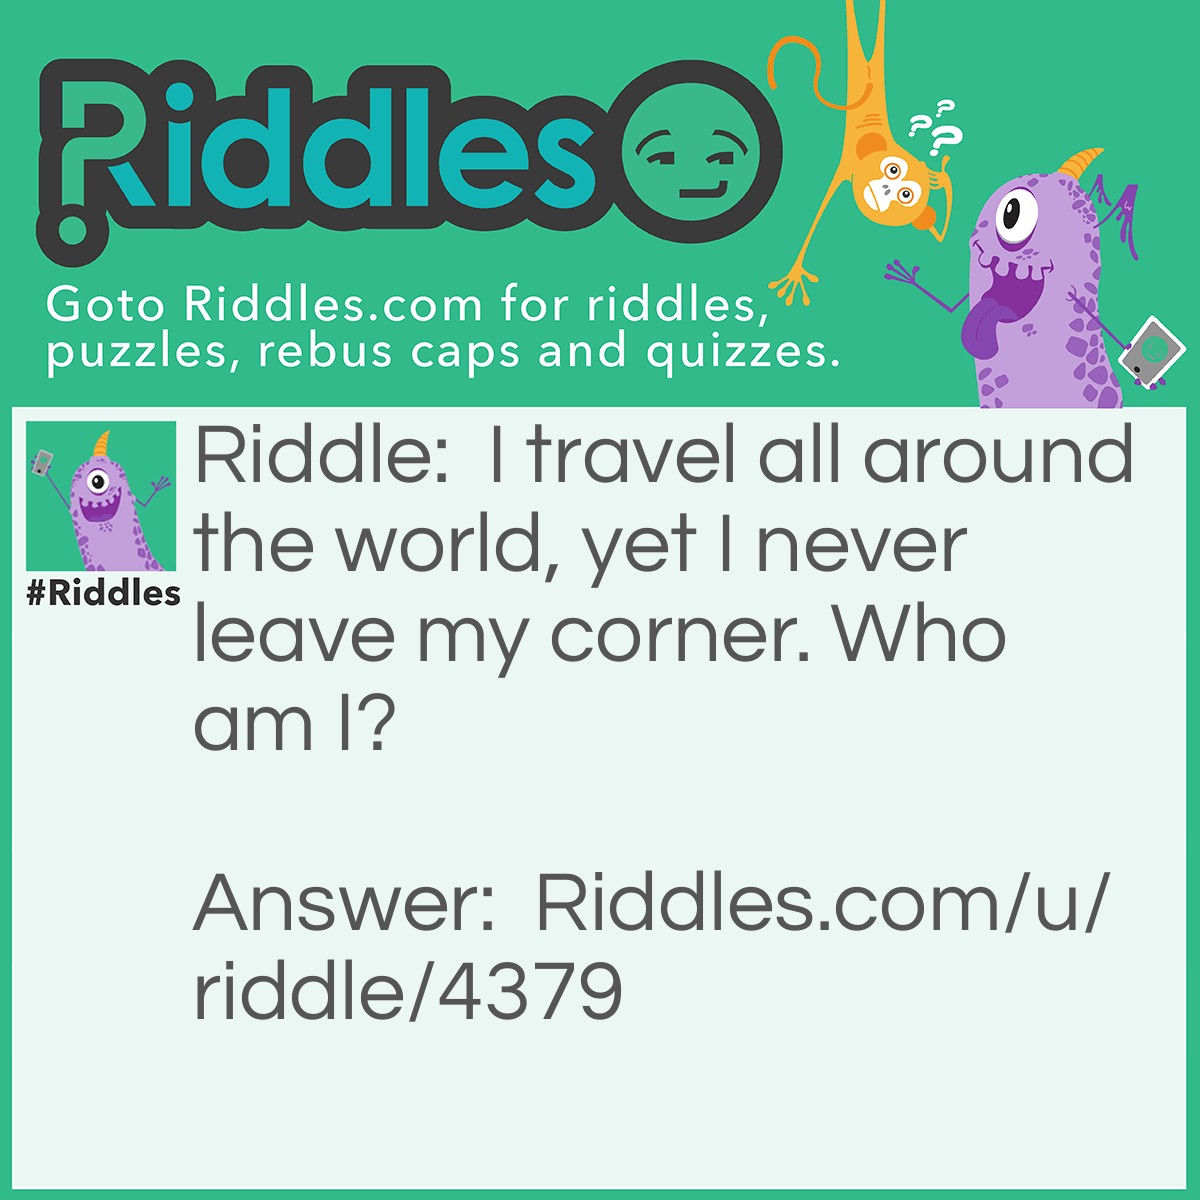 Riddle: I travel all around the world, yet I never leave my corner. Who am I? Answer: A stamp.